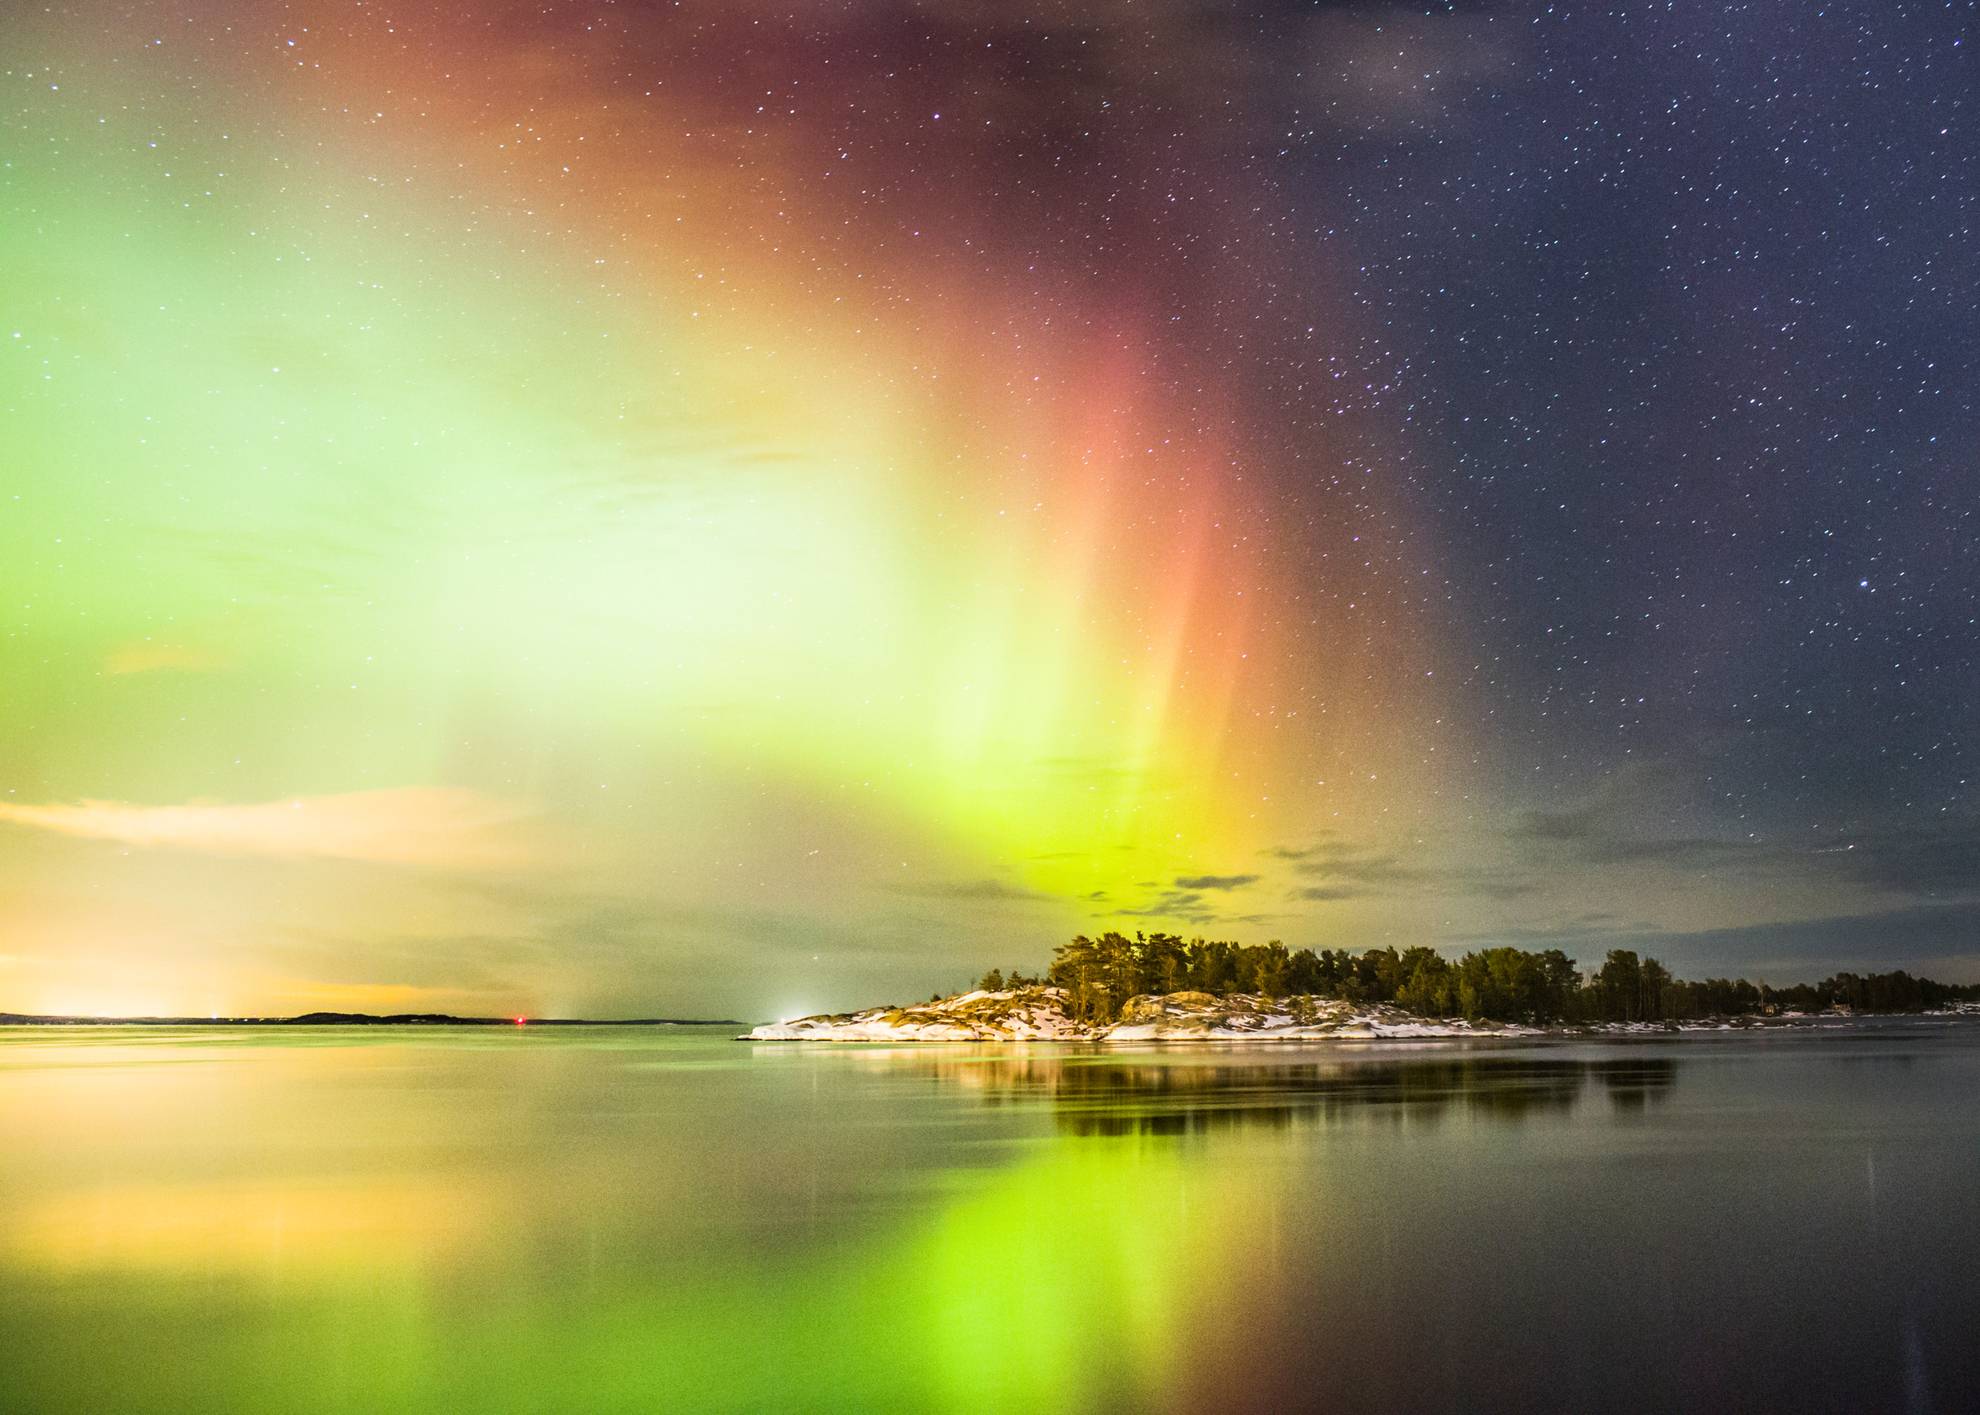 The northern lights in the sky are reflected in the water below. A city is visible from afar.